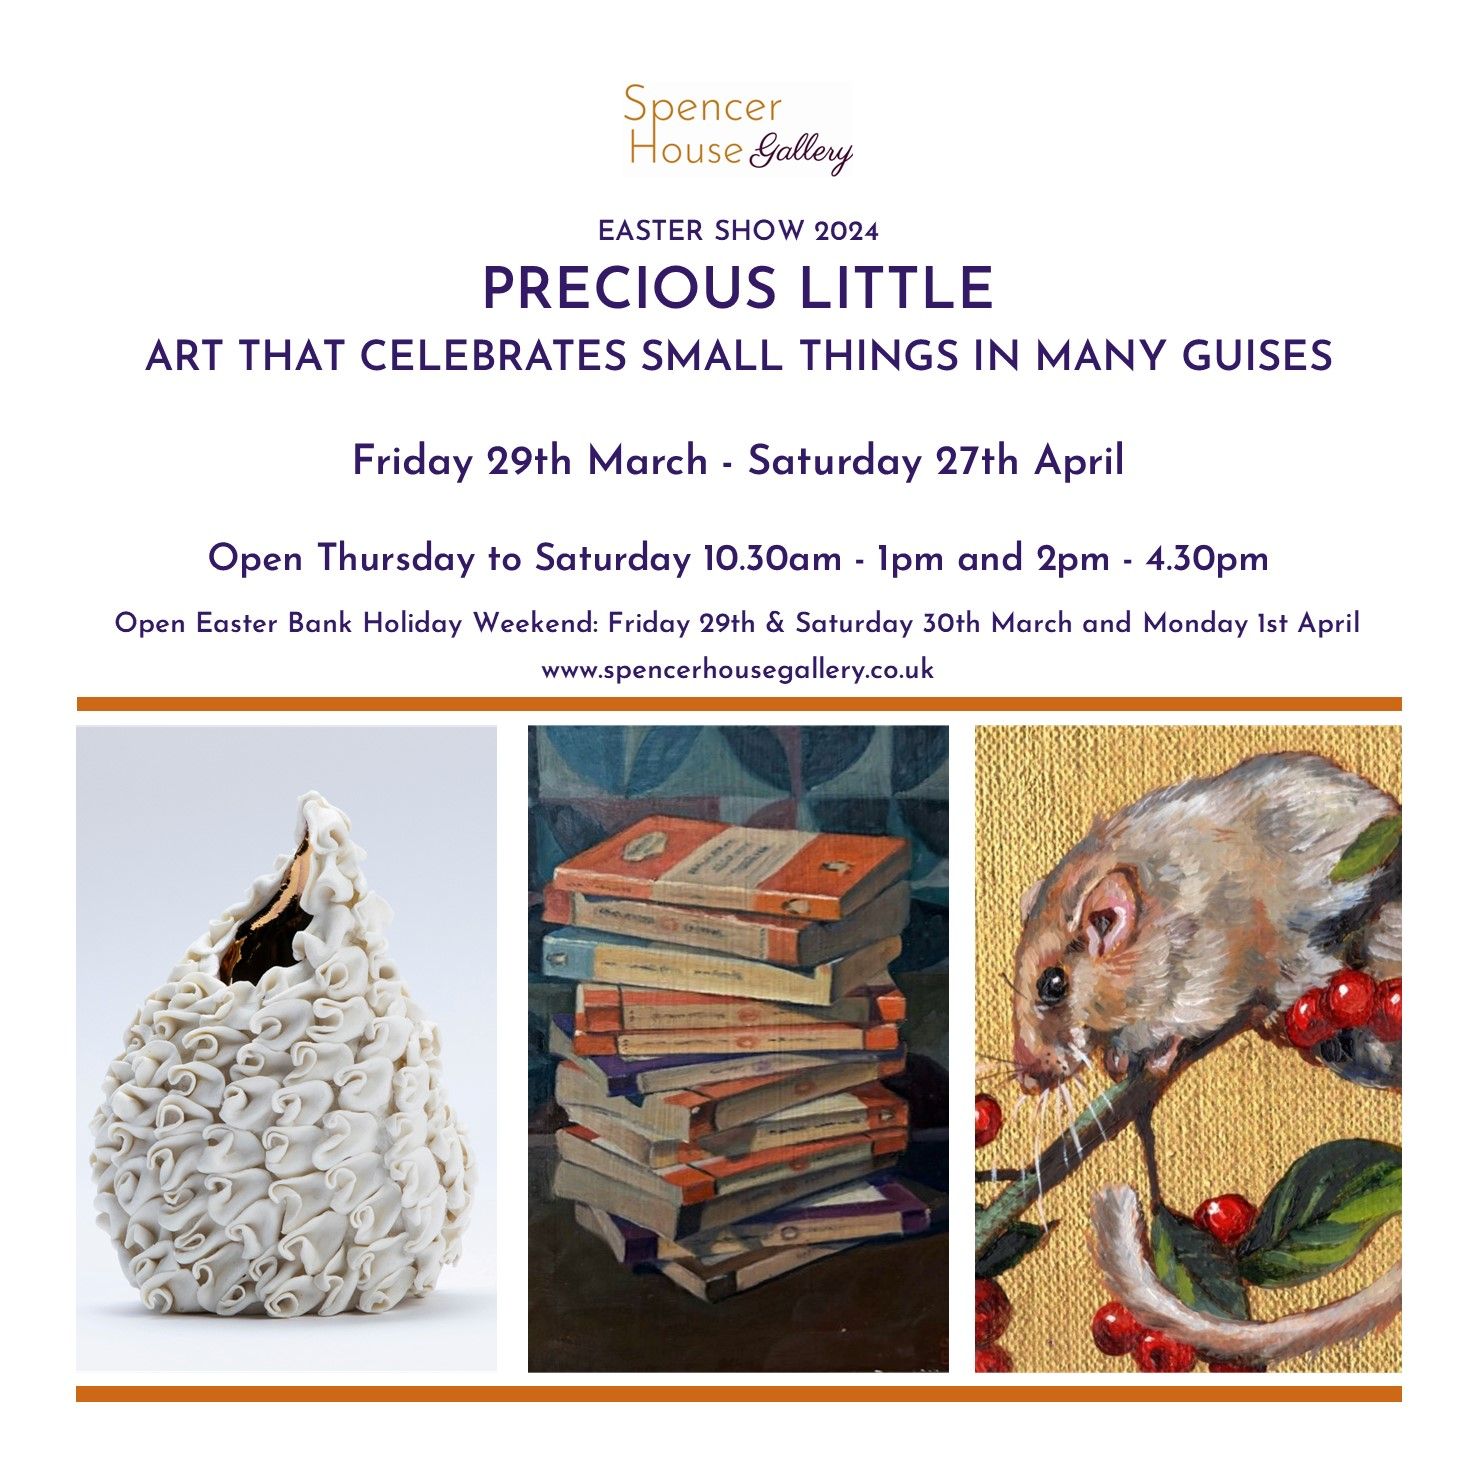 An image made up of a montage of three images and details of Precious Little art exhibition. The images running from left to right are of a textured white ceramic sculptural form, shaped like a tear drop, The inside is smooth and golden. The middle image is of an artwork of a stack of Penguin Publishing paperback books, The image on the right is of a section of a painting on a gold background, depicting a Dormouse balanced on a berry covered branch.